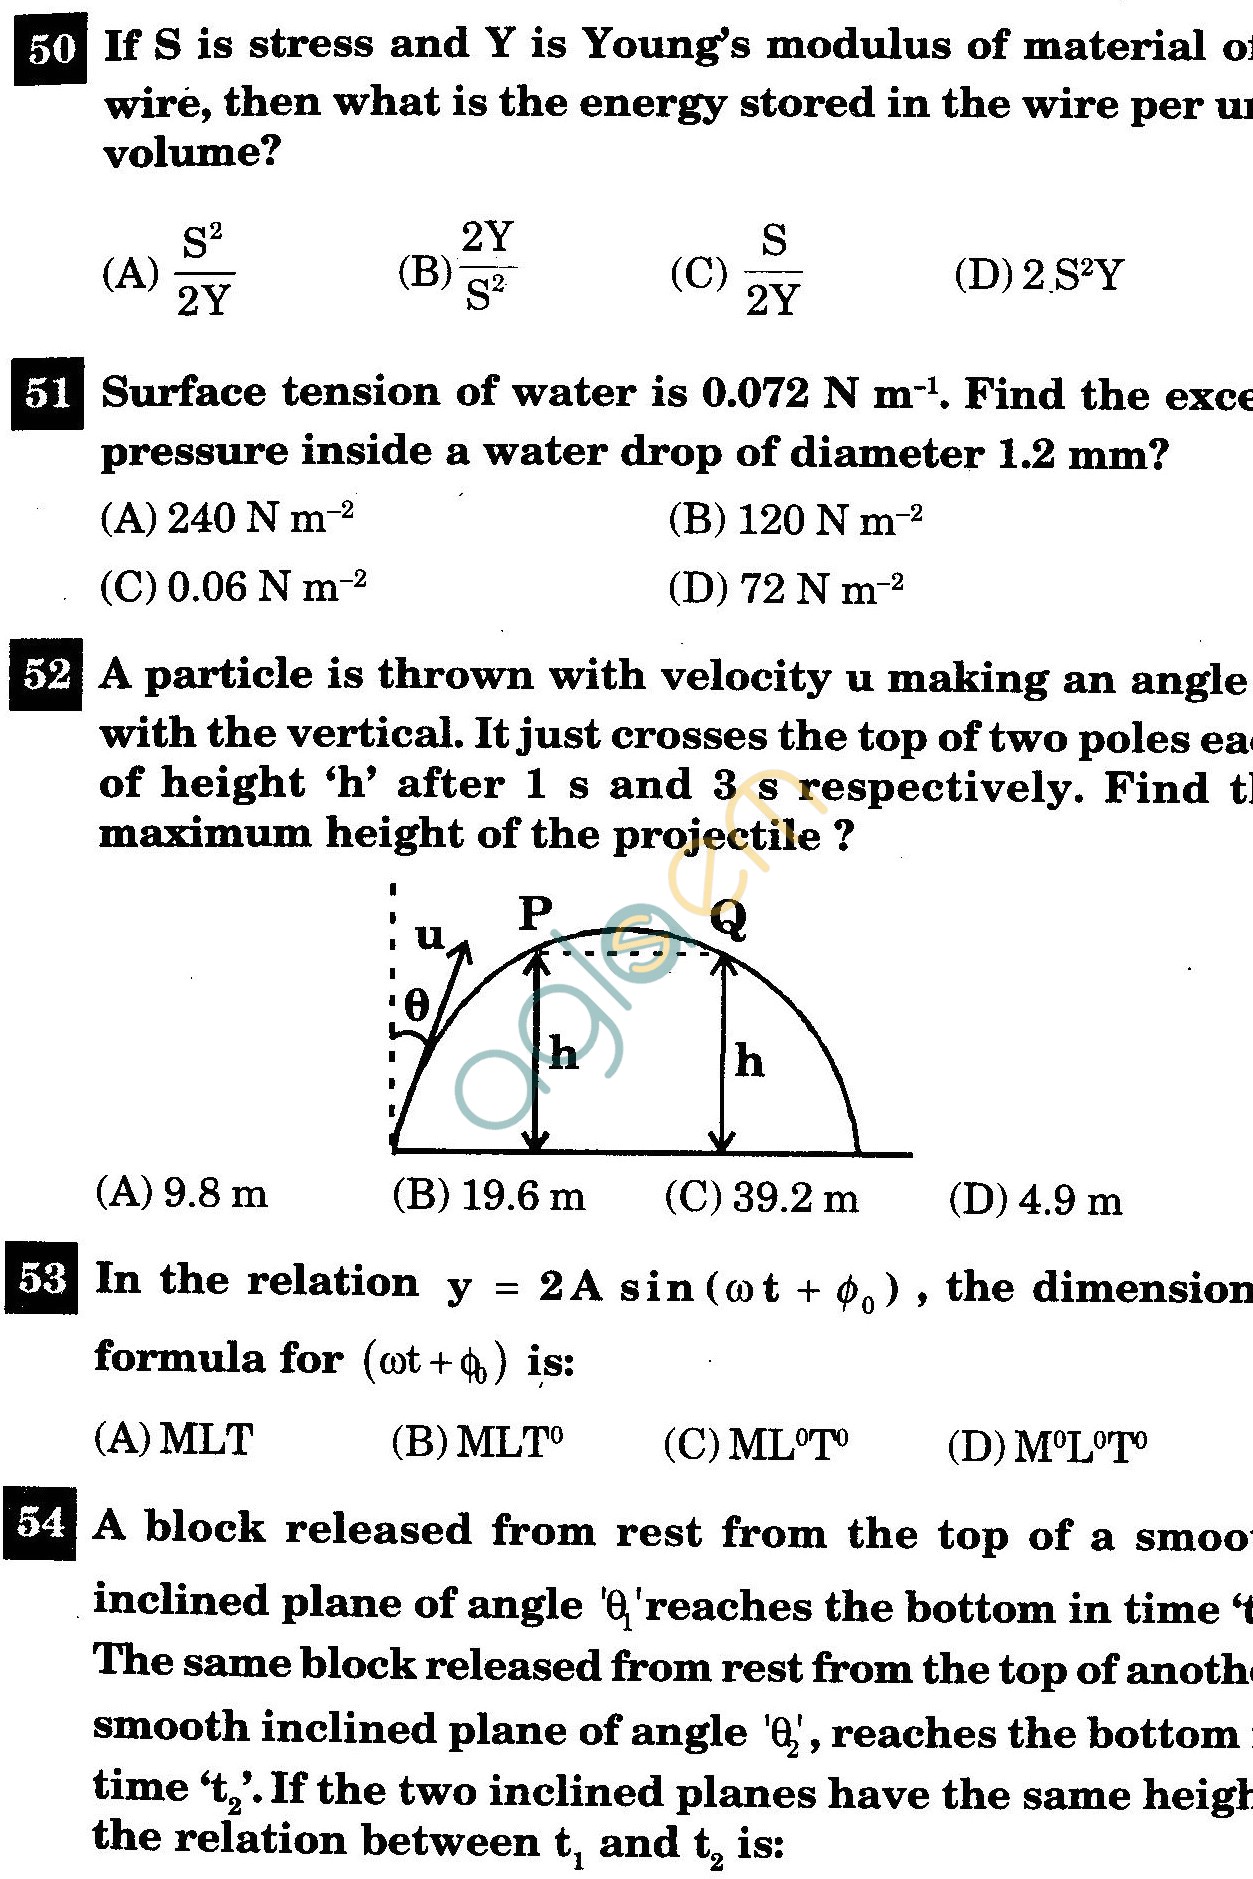 NSTSE 2011 Class XI PCB Question Paper with Answers - Physics